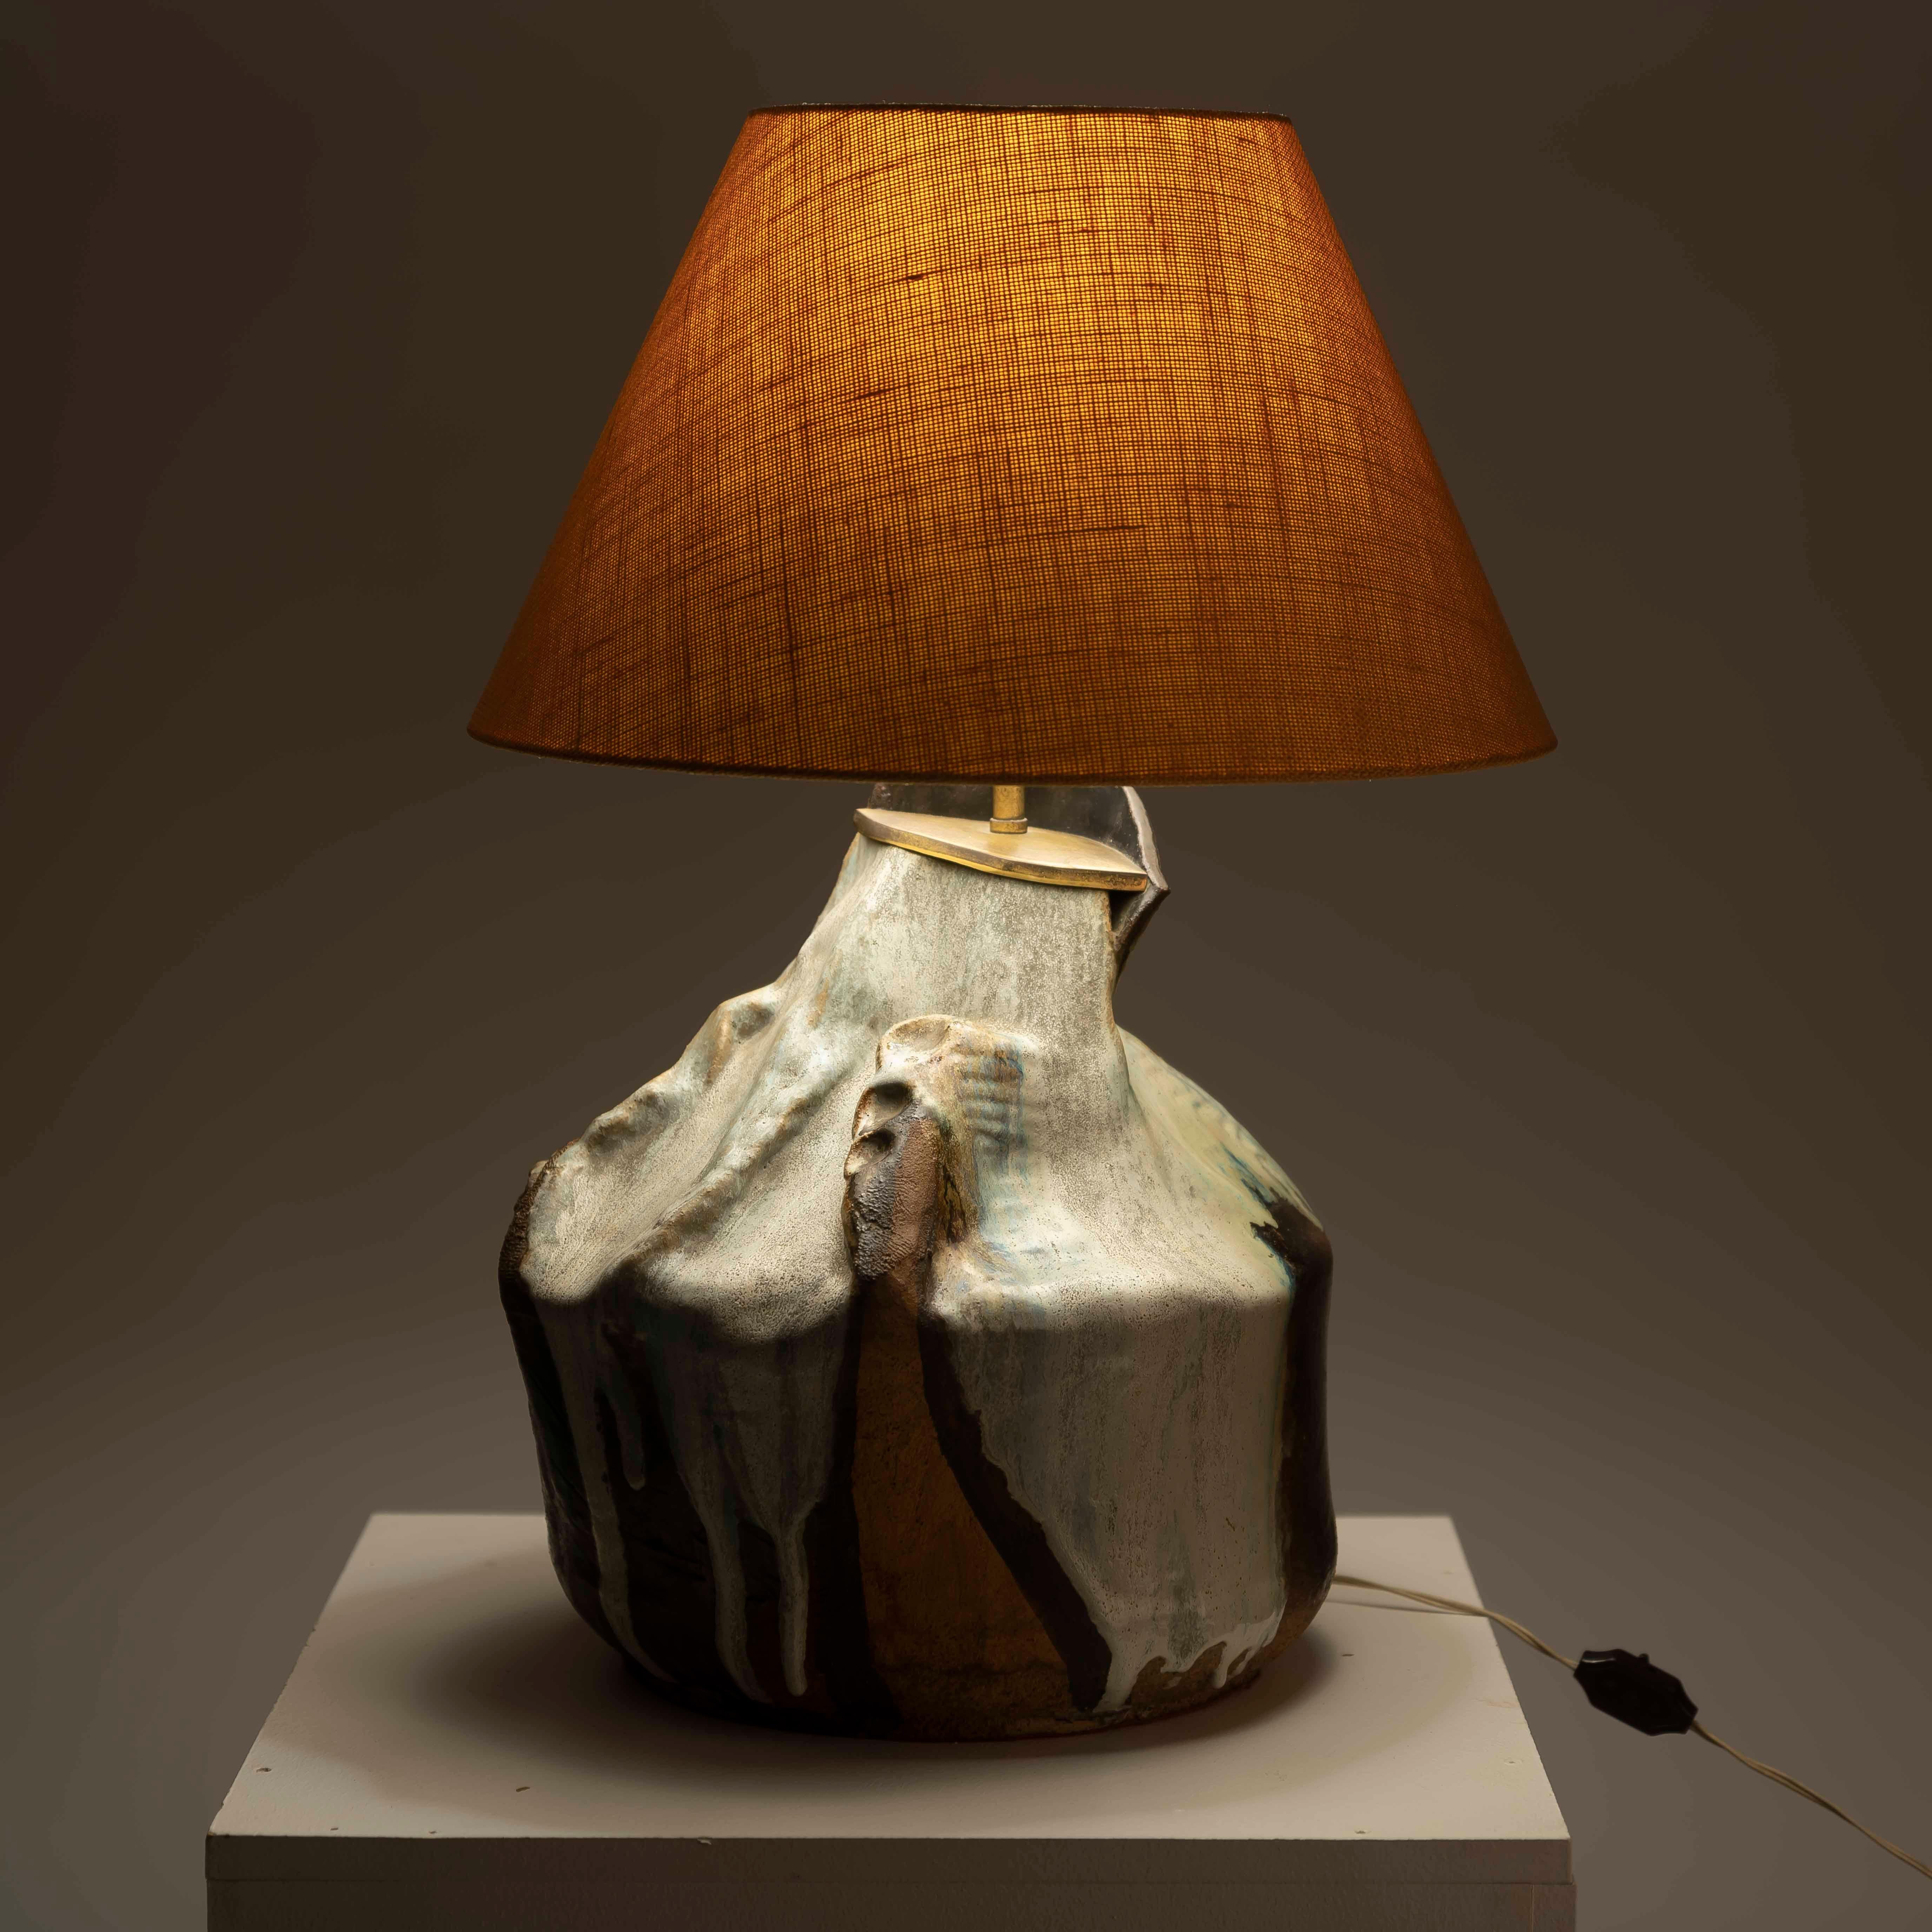 Immerse yourself in the rugged allure of Brutalist design with the XXL glazed ceramic table lamp from the 1980s. This striking piece is more than just a source of illumination; it's a bold statement of artistic expression and architectural